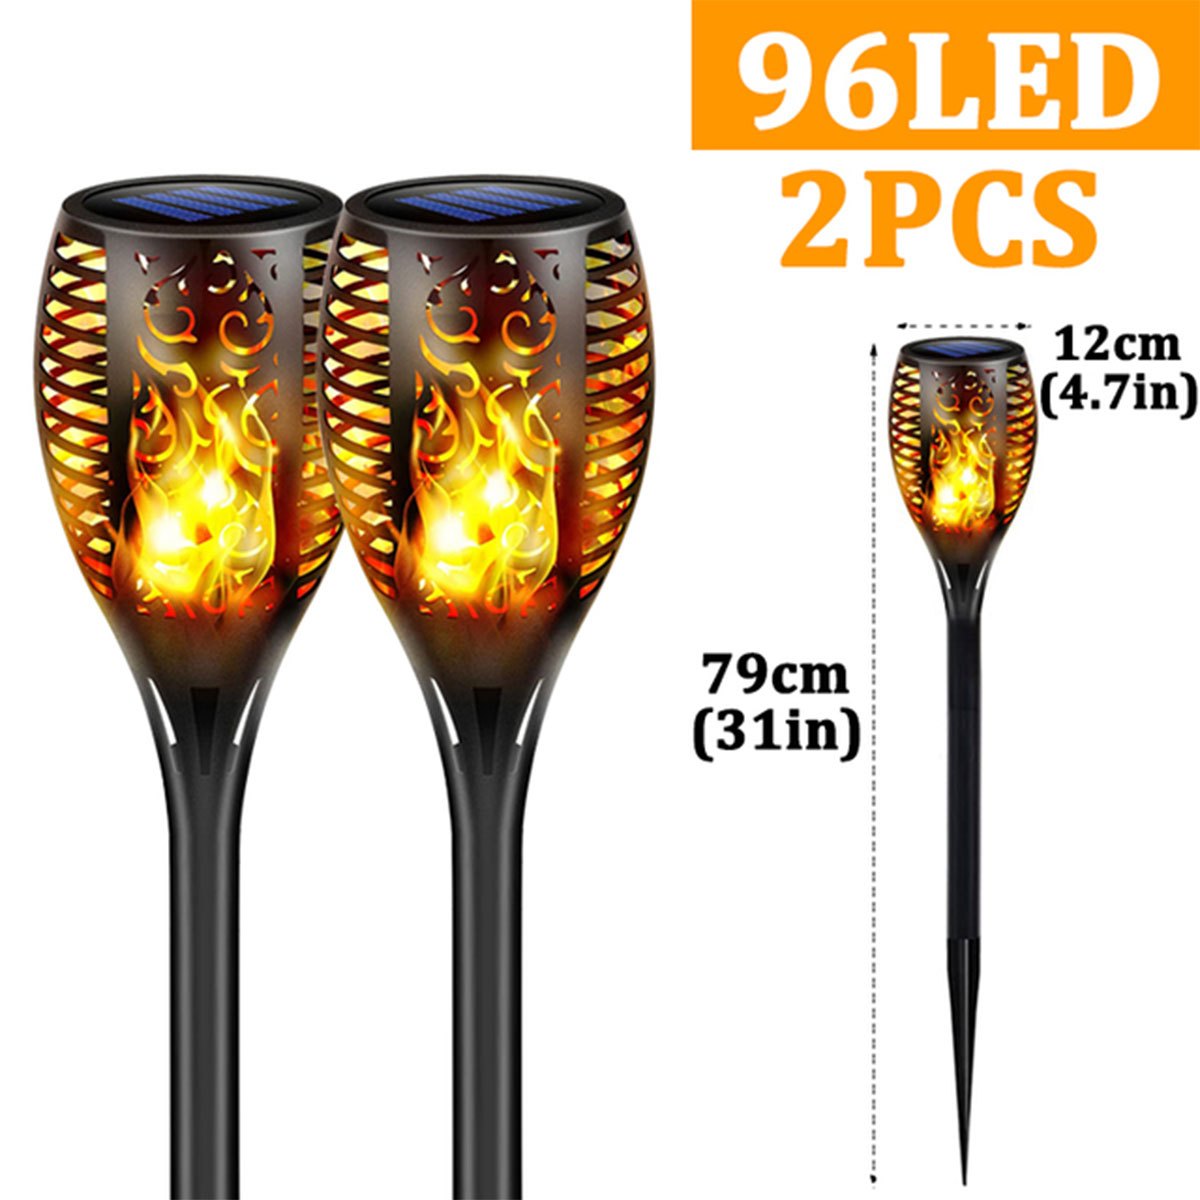 12 33 96led Outdoor Solar Torch Light Ip65 Waterproof Flashing Flame ...